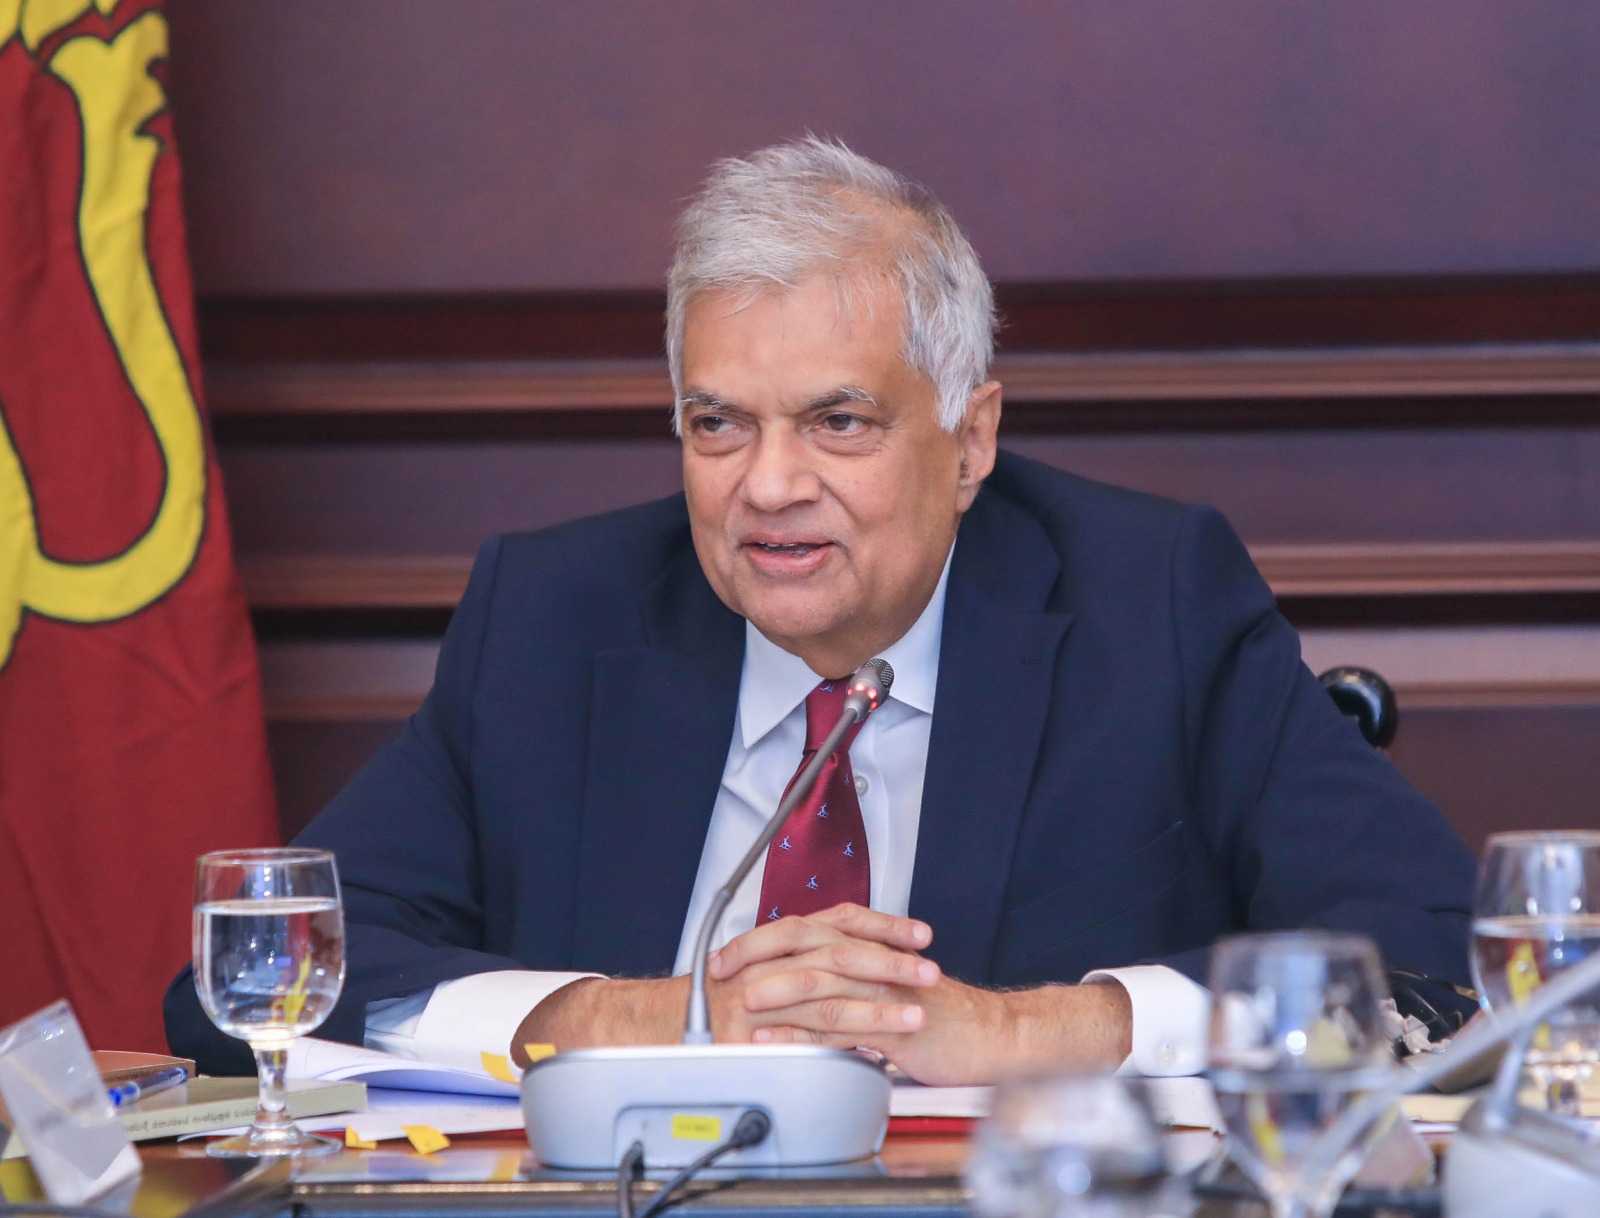 President Envisions Sri Lanka as a Developed Nation by 2048 Focusing on Education Transformation